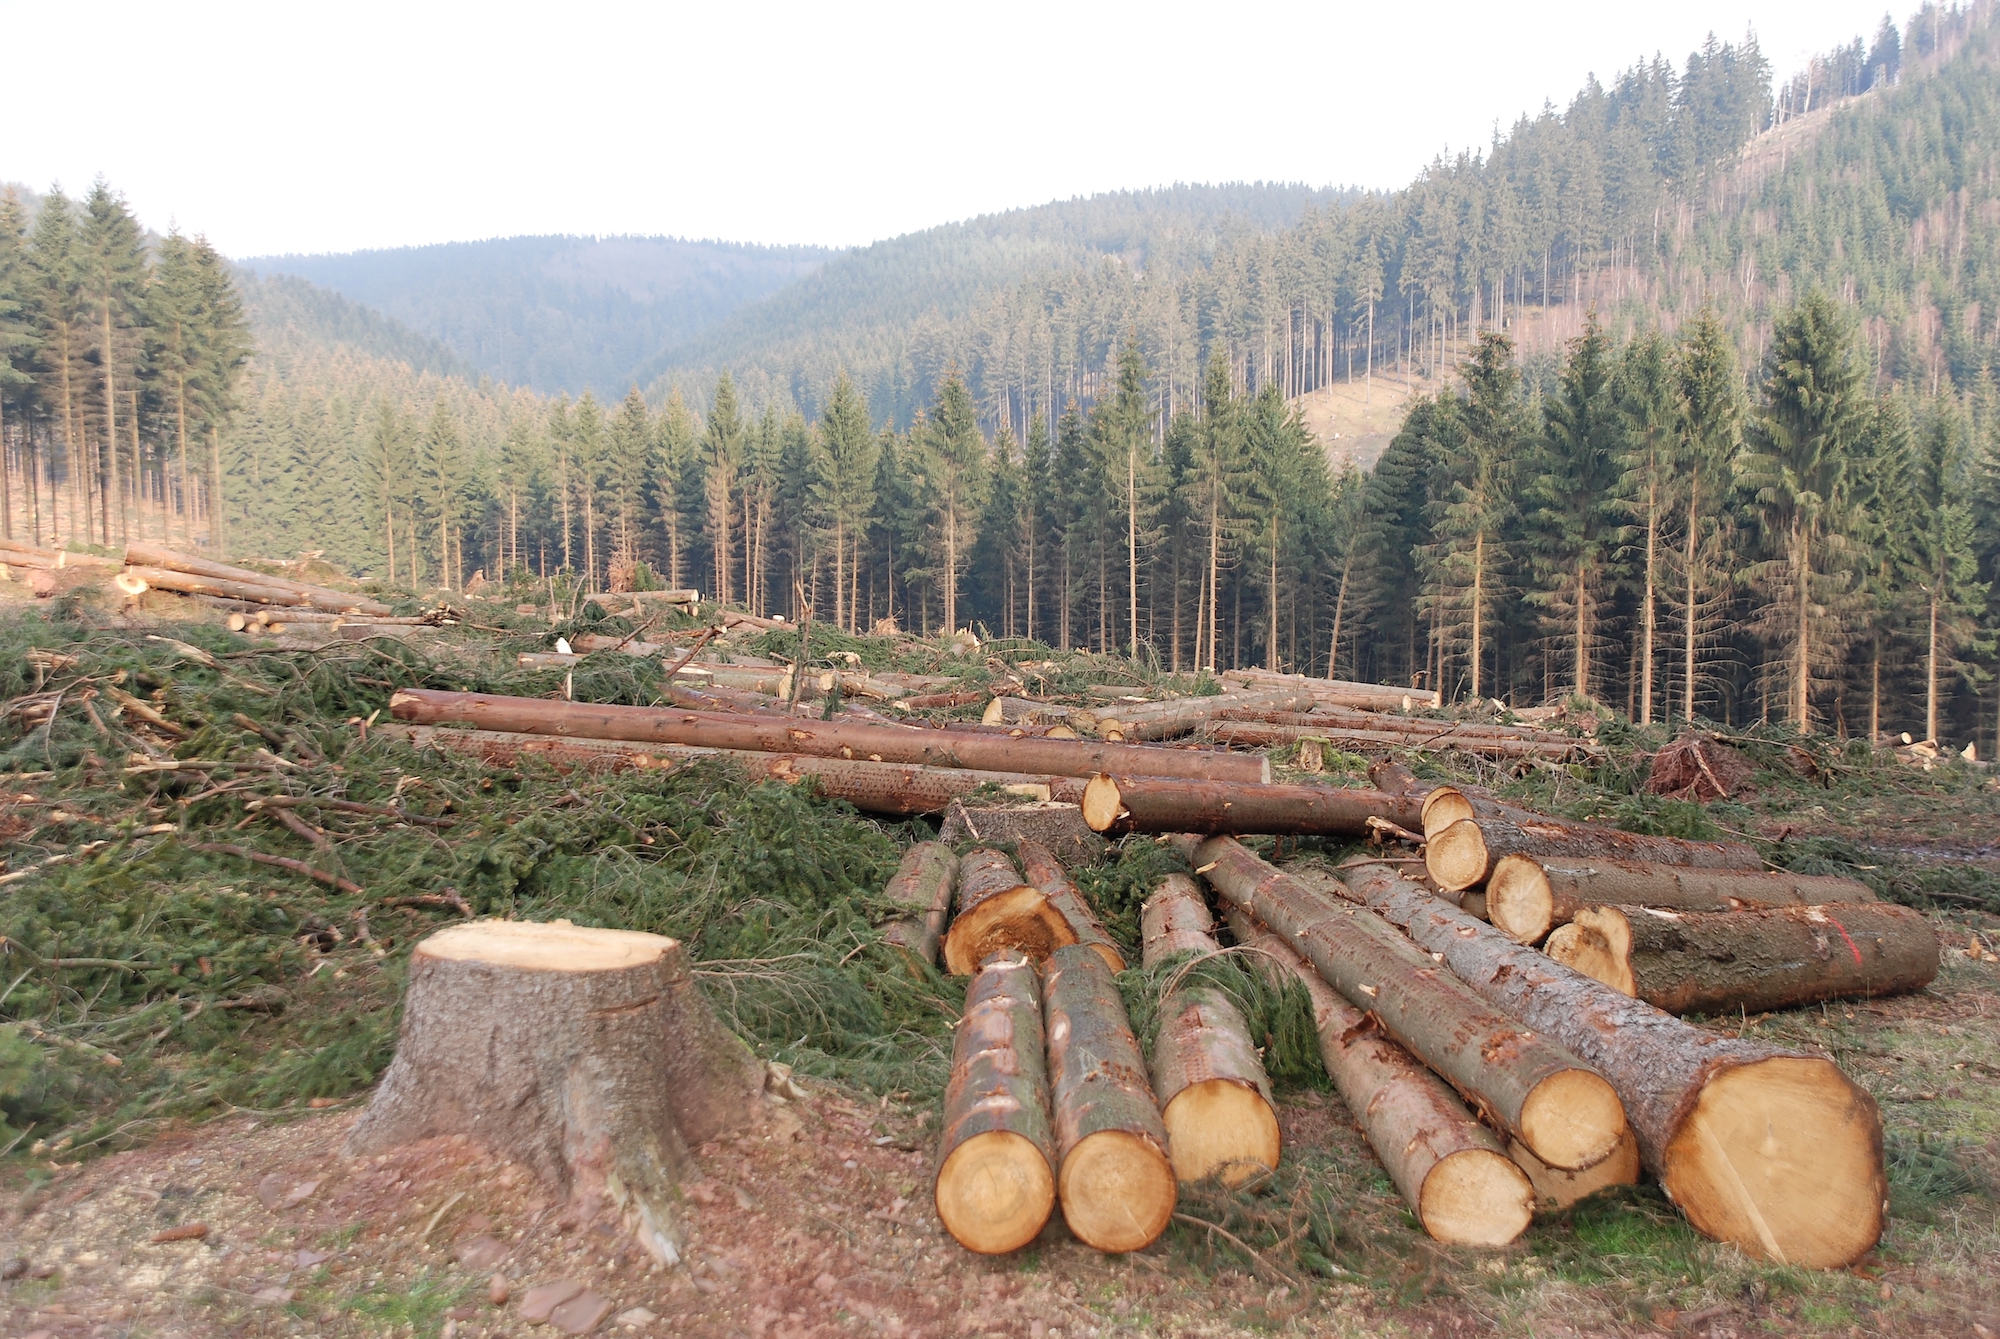 How Does Deforestation Affect the Environment?